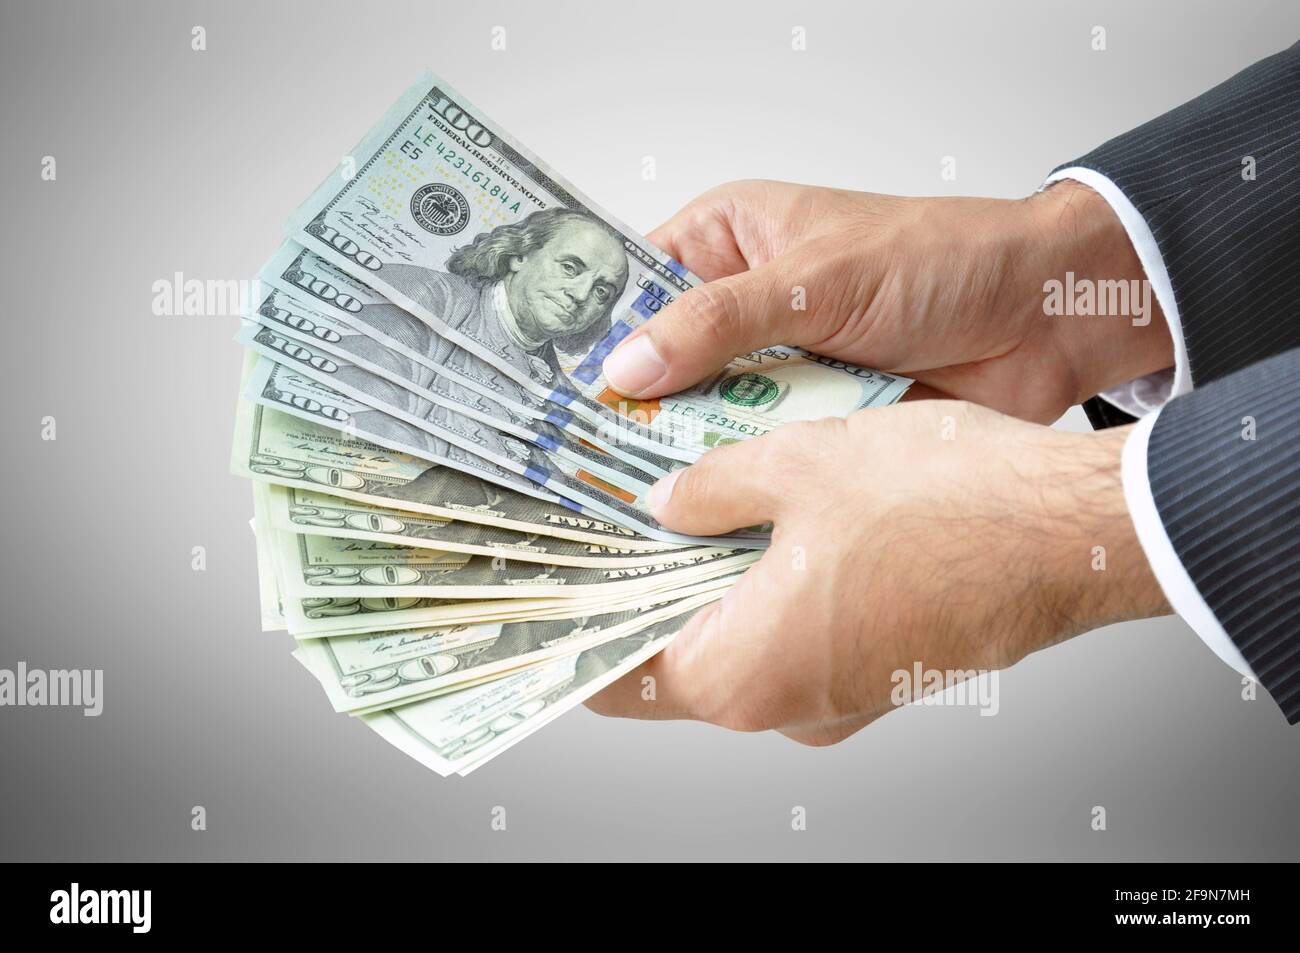 Money - hands holding banknotes (United States Dollars or USD) on gray background Stock Photo